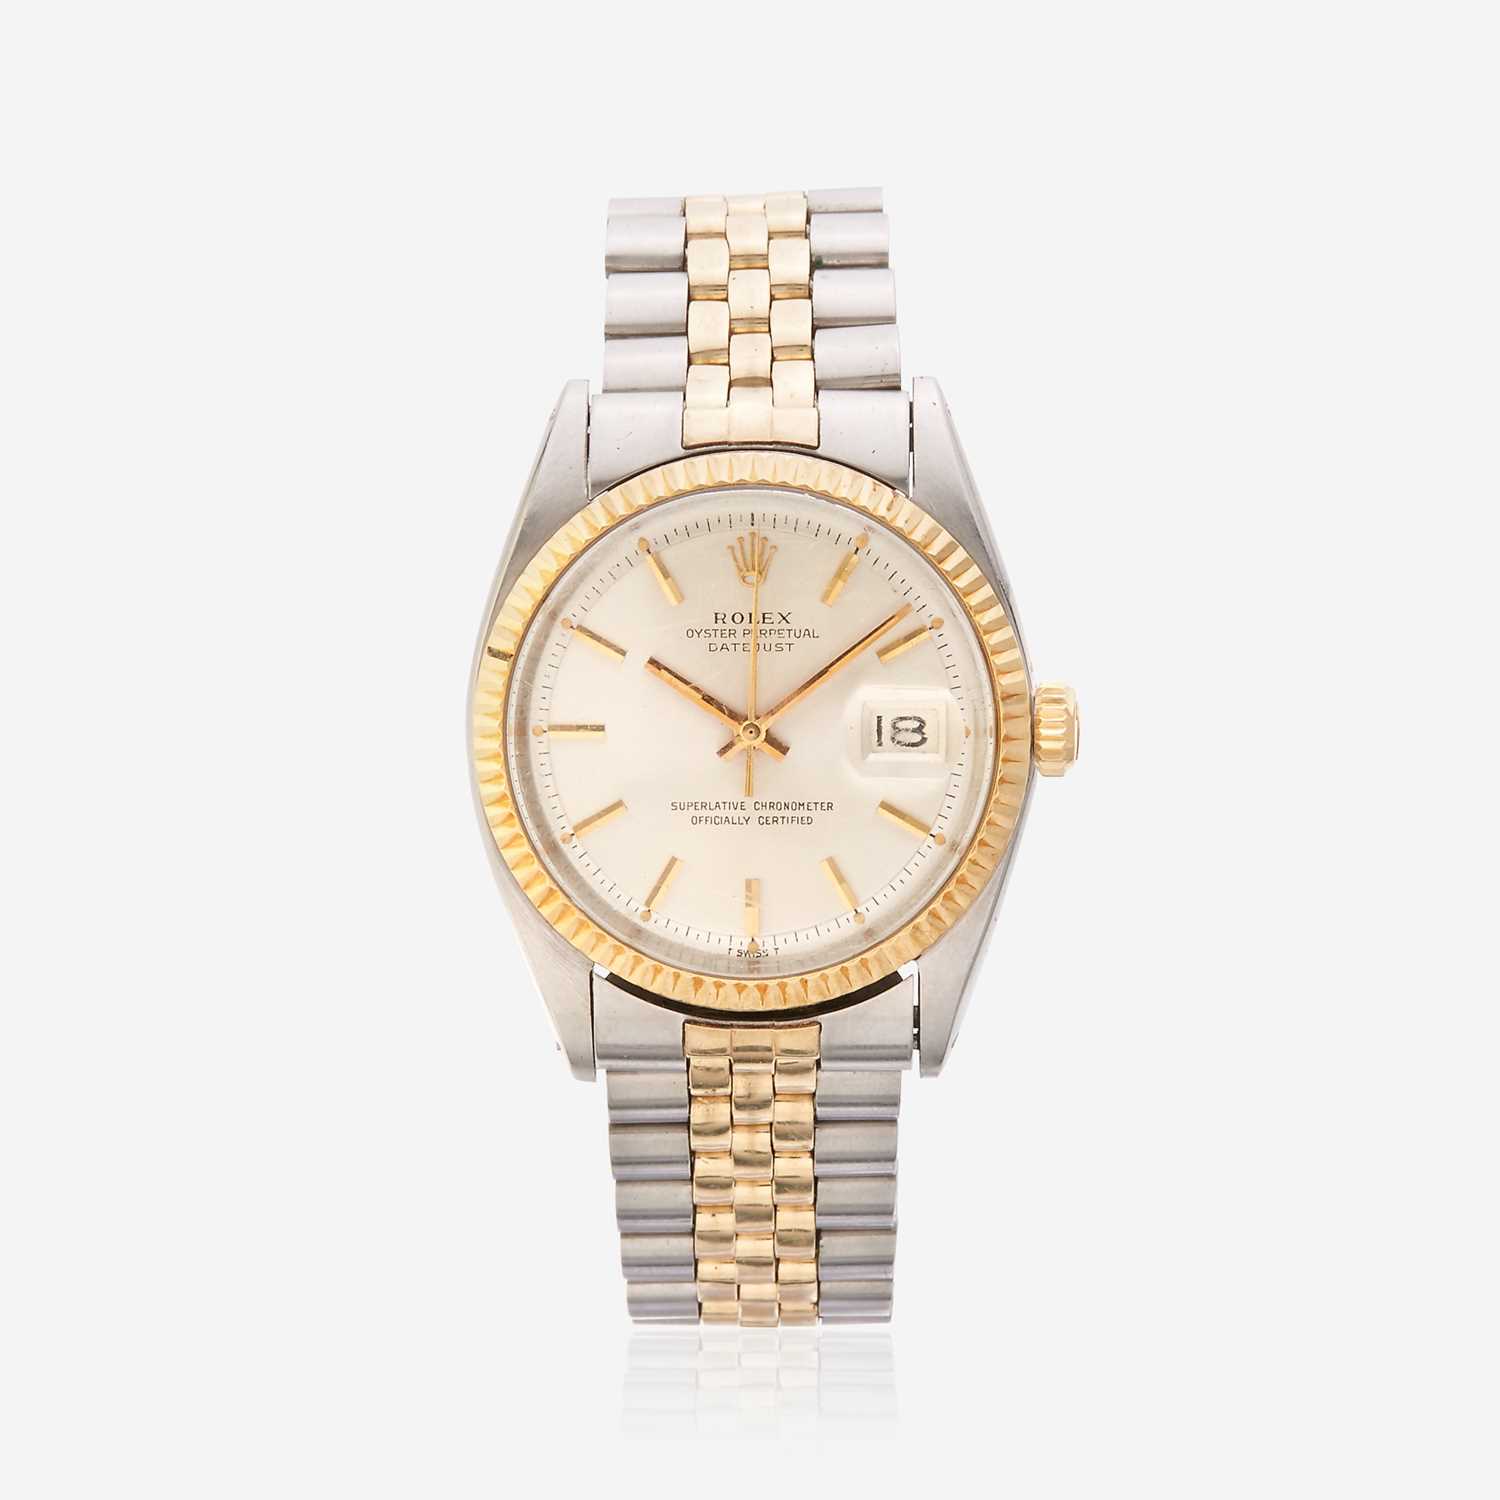 Lot 189 - A stainless steel and gold bracelet watch, Rolex